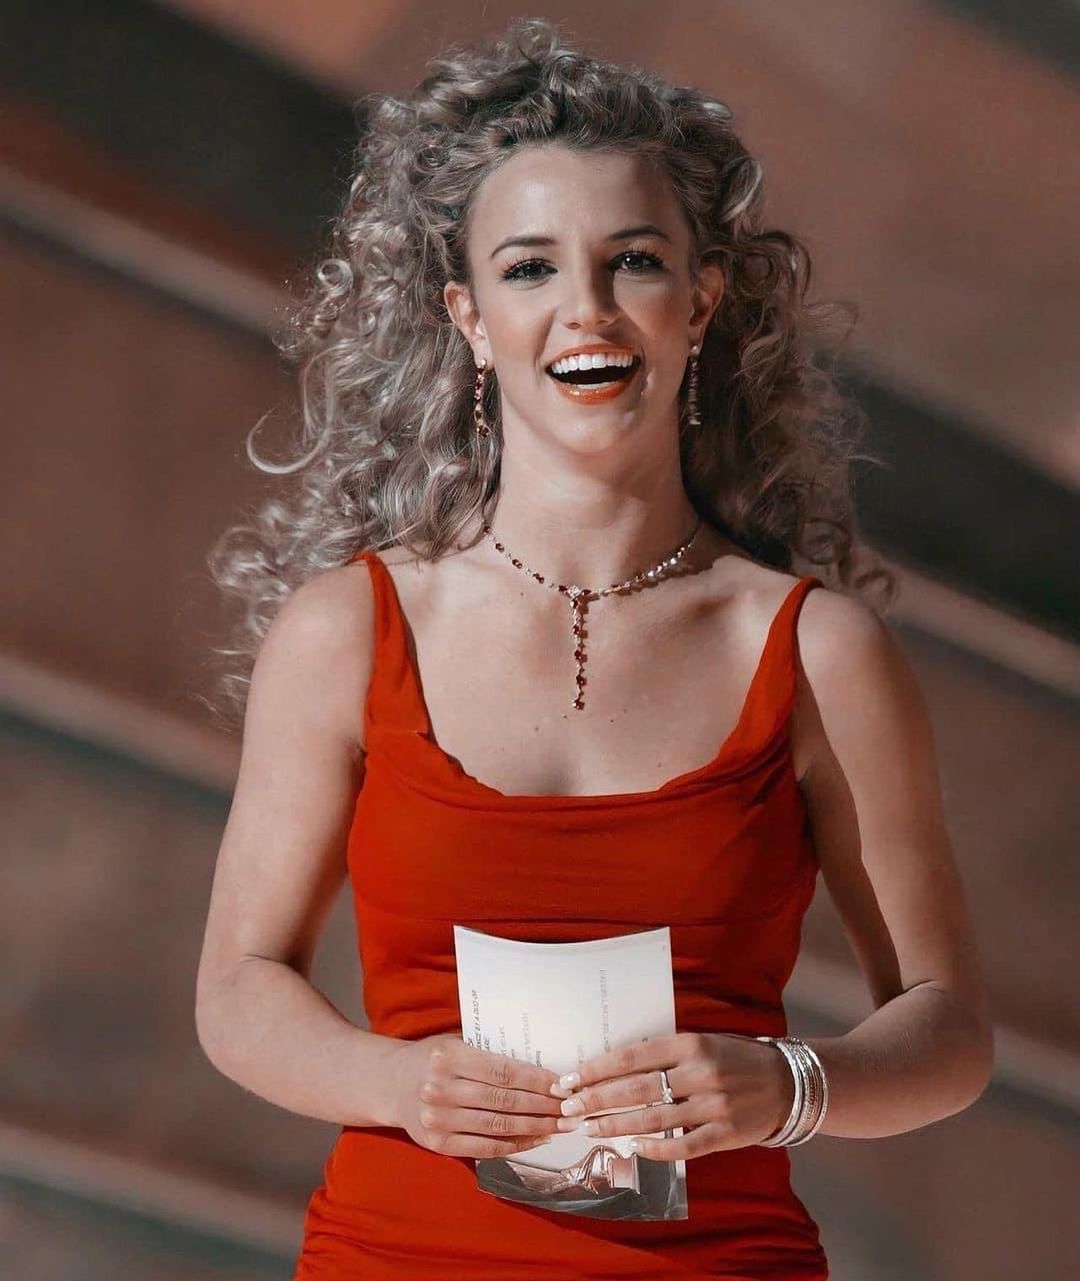 A throwback photo of Britney Spears in a red dress and matching jewellery set, holding a paper in her hands. 